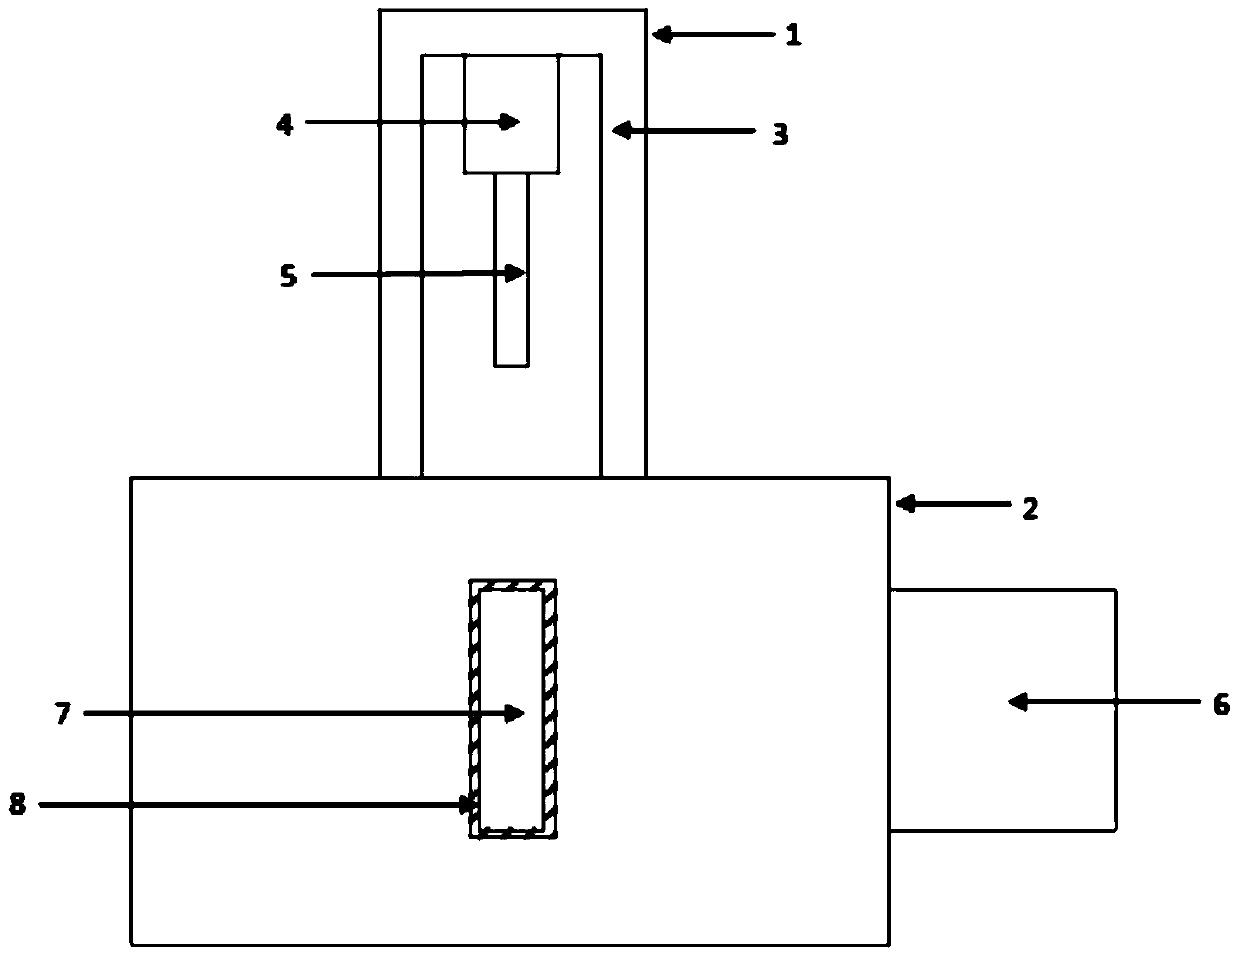 An indirect neutron ct imaging device for spent fuel components of pressurized water reactors